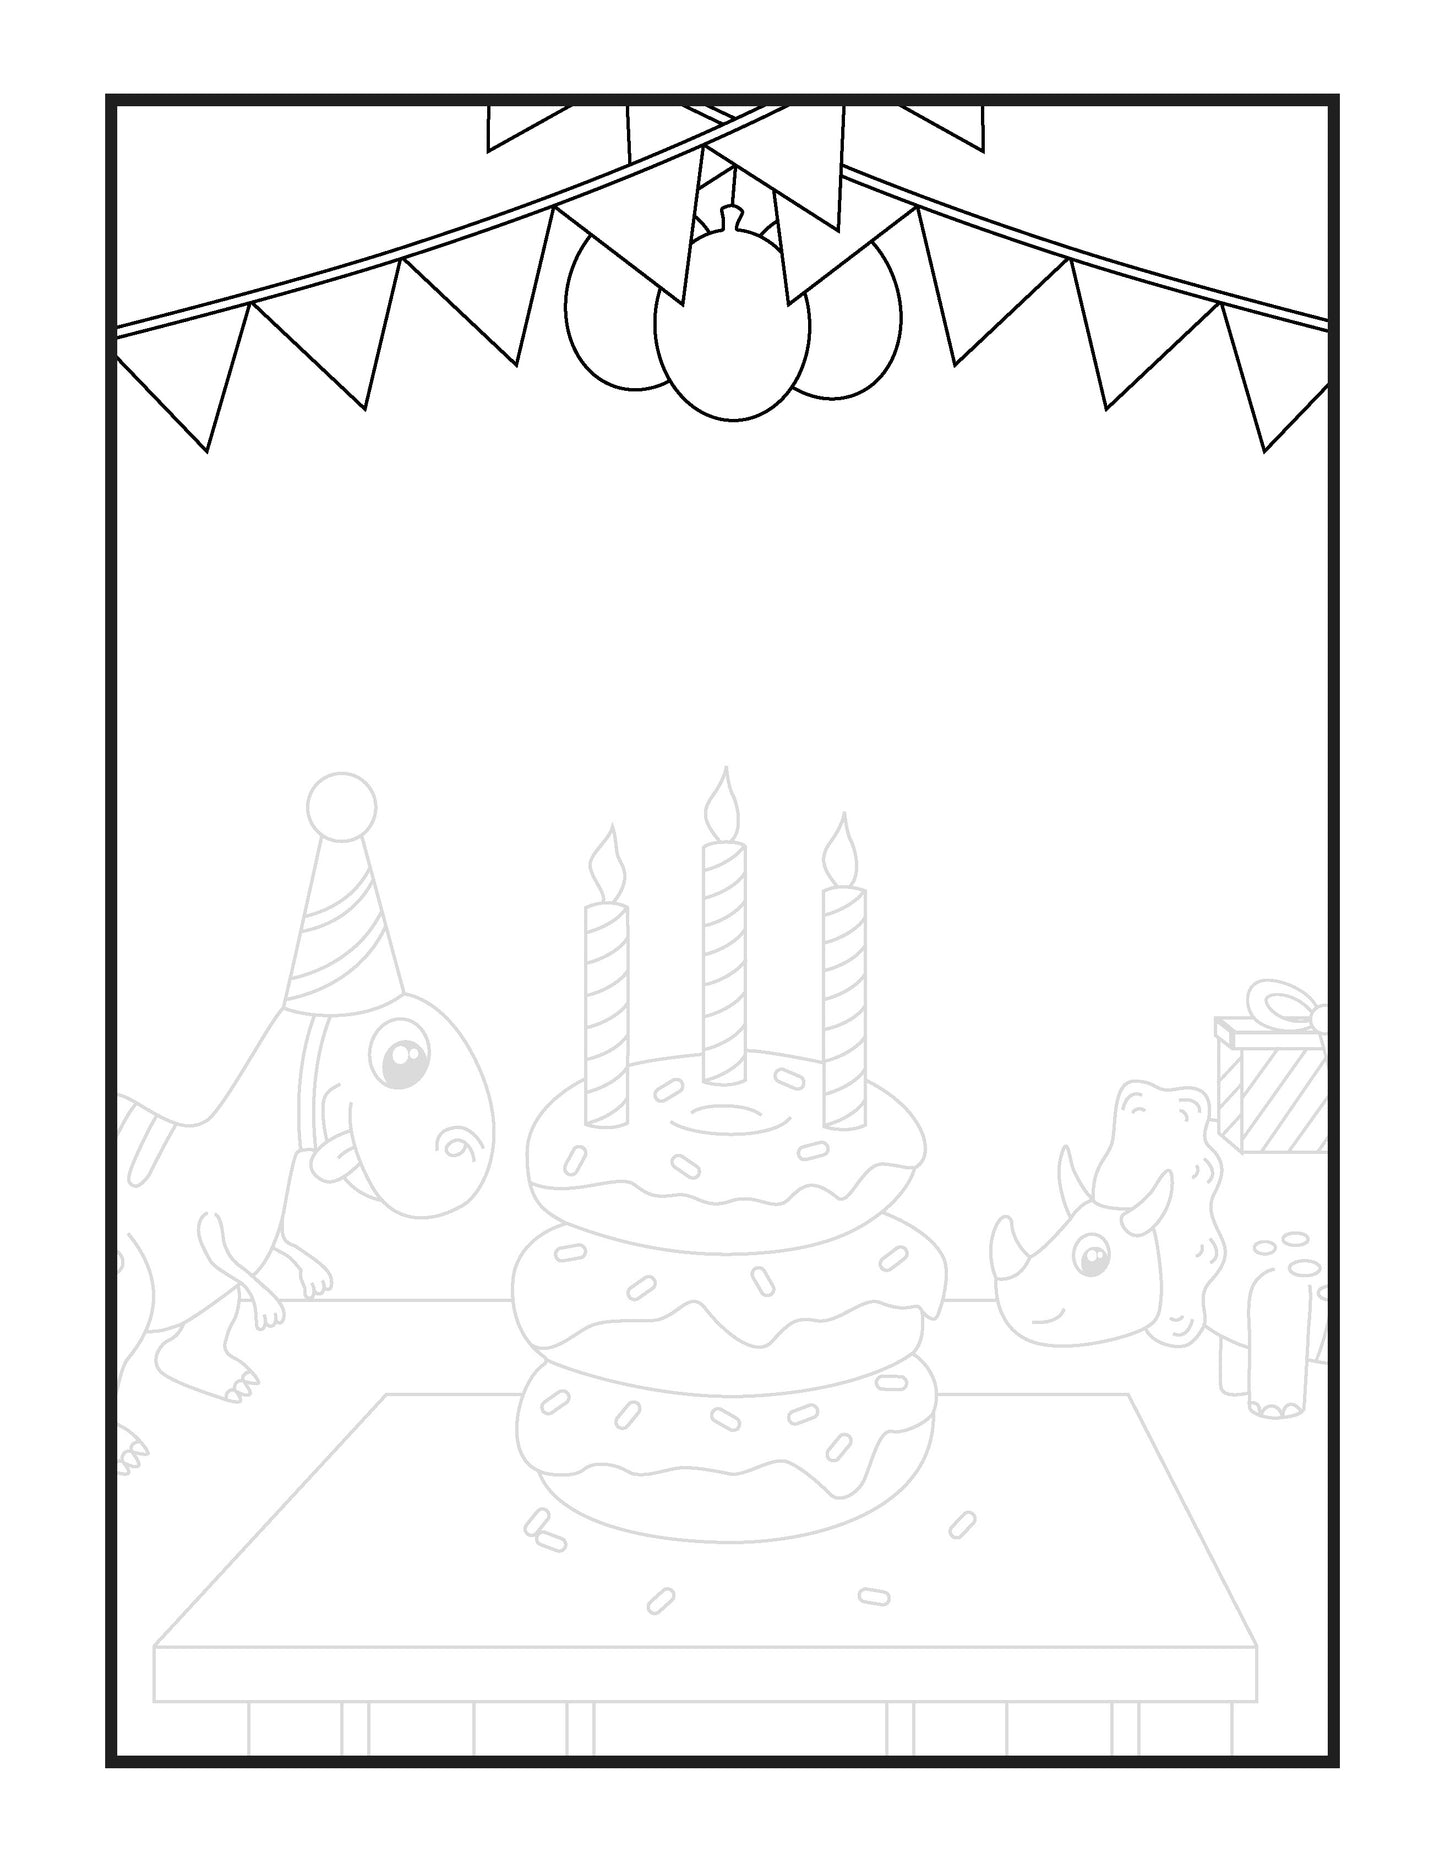  A coloring page depicting a birthday party shows a playful scene with cartoon dinosaurs celebrating. One dinosaur wearing a party hat is gazing at a large three-tiered cake with three lit candles on top, sitting on a table. Another smaller dinosaur with a happy expression is peeking from the other side of the table. Above them, a string of pennants and a large decorative light set the party mood. The background is blank, inviting kids to add their creative touch.